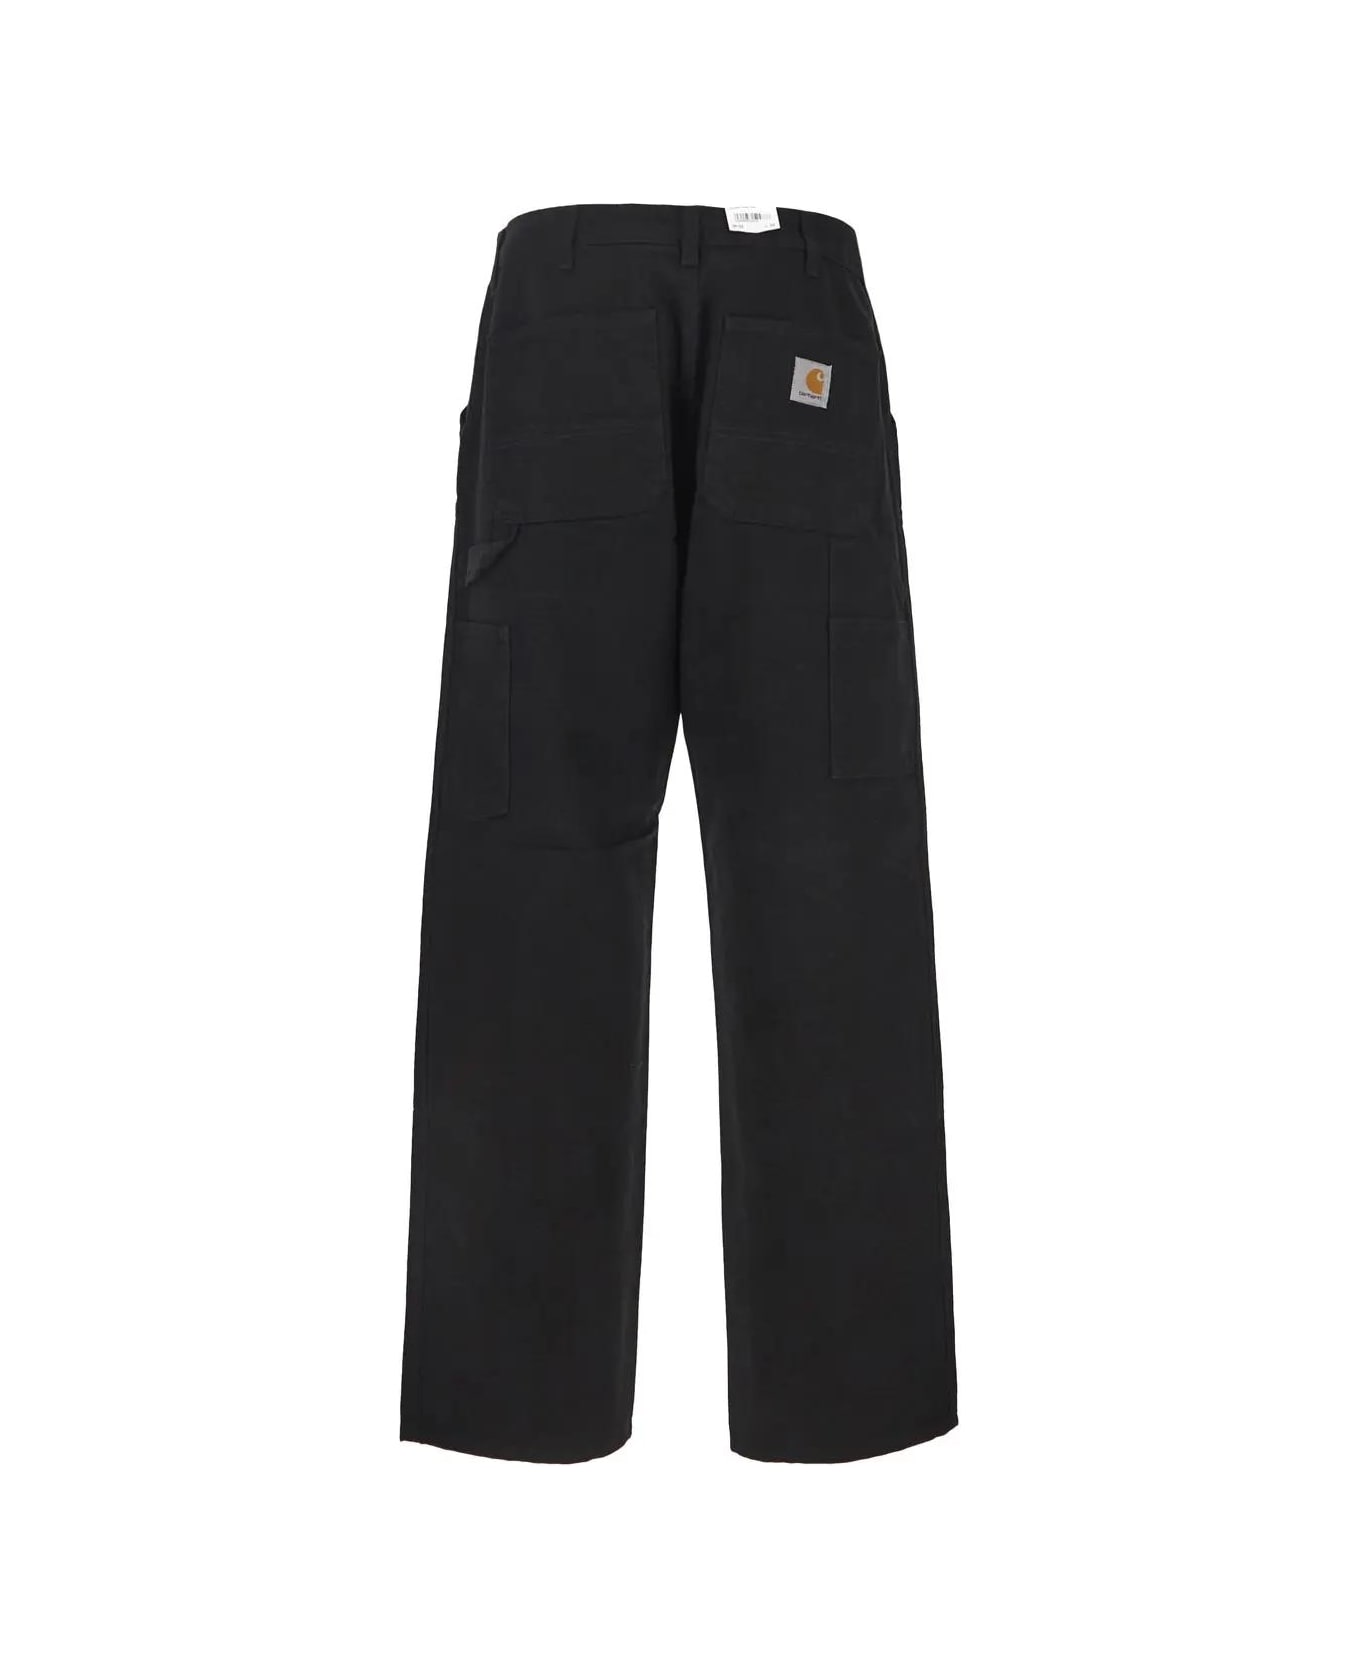 Carhartt Double Knee Pant - multicolor